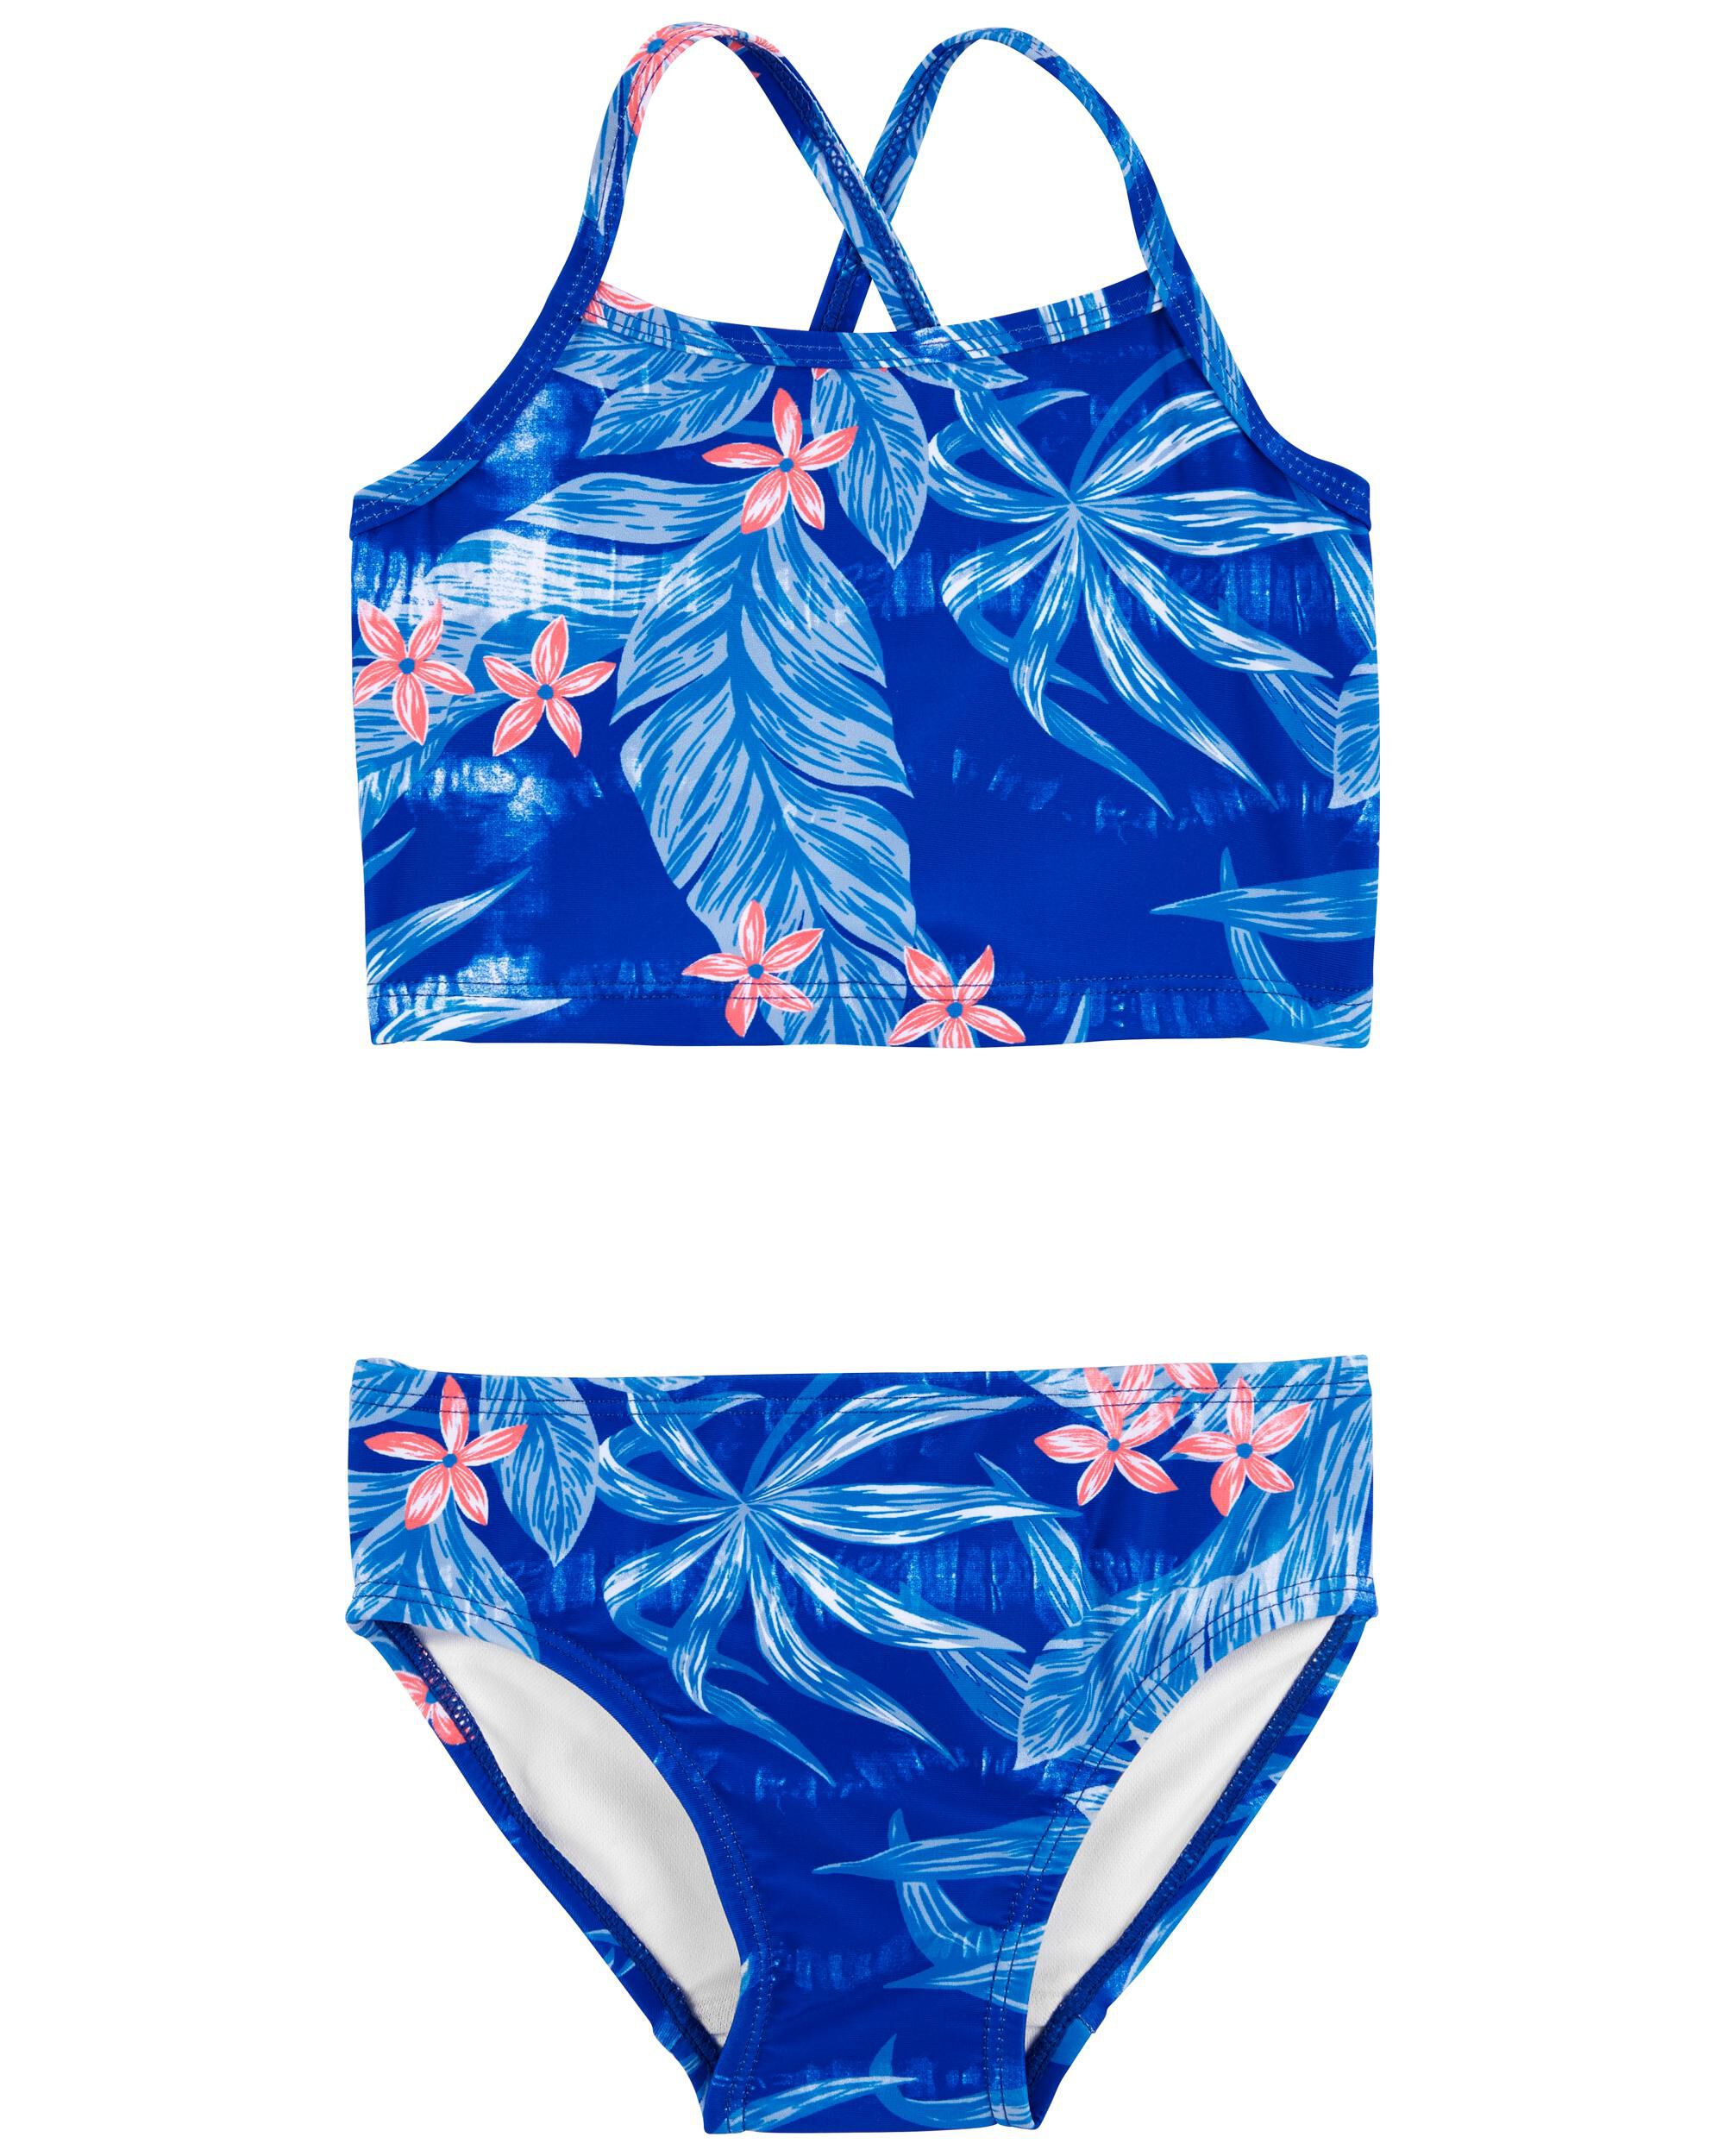 Toddler Girls' Hawaiian One Piece Swimsuit Just One You made by Carter’s 5T 